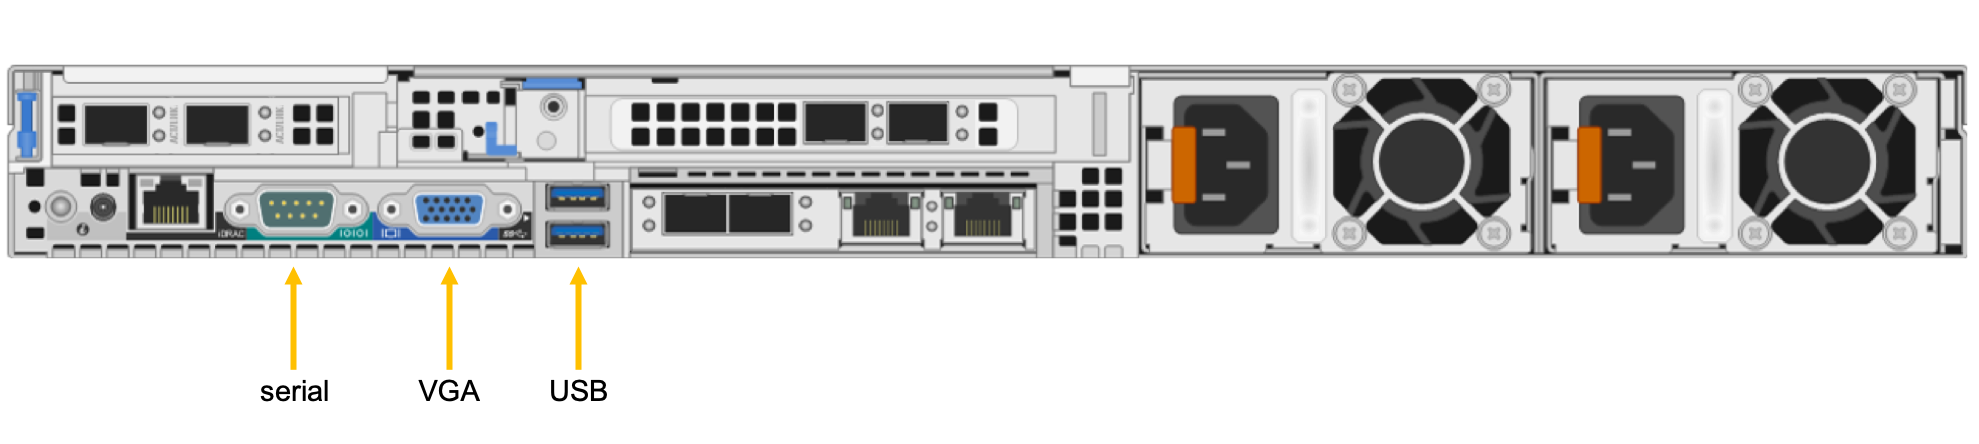 diagram of back of Azure FXT Edge Filer with serial, VGA, and USB ports labeled